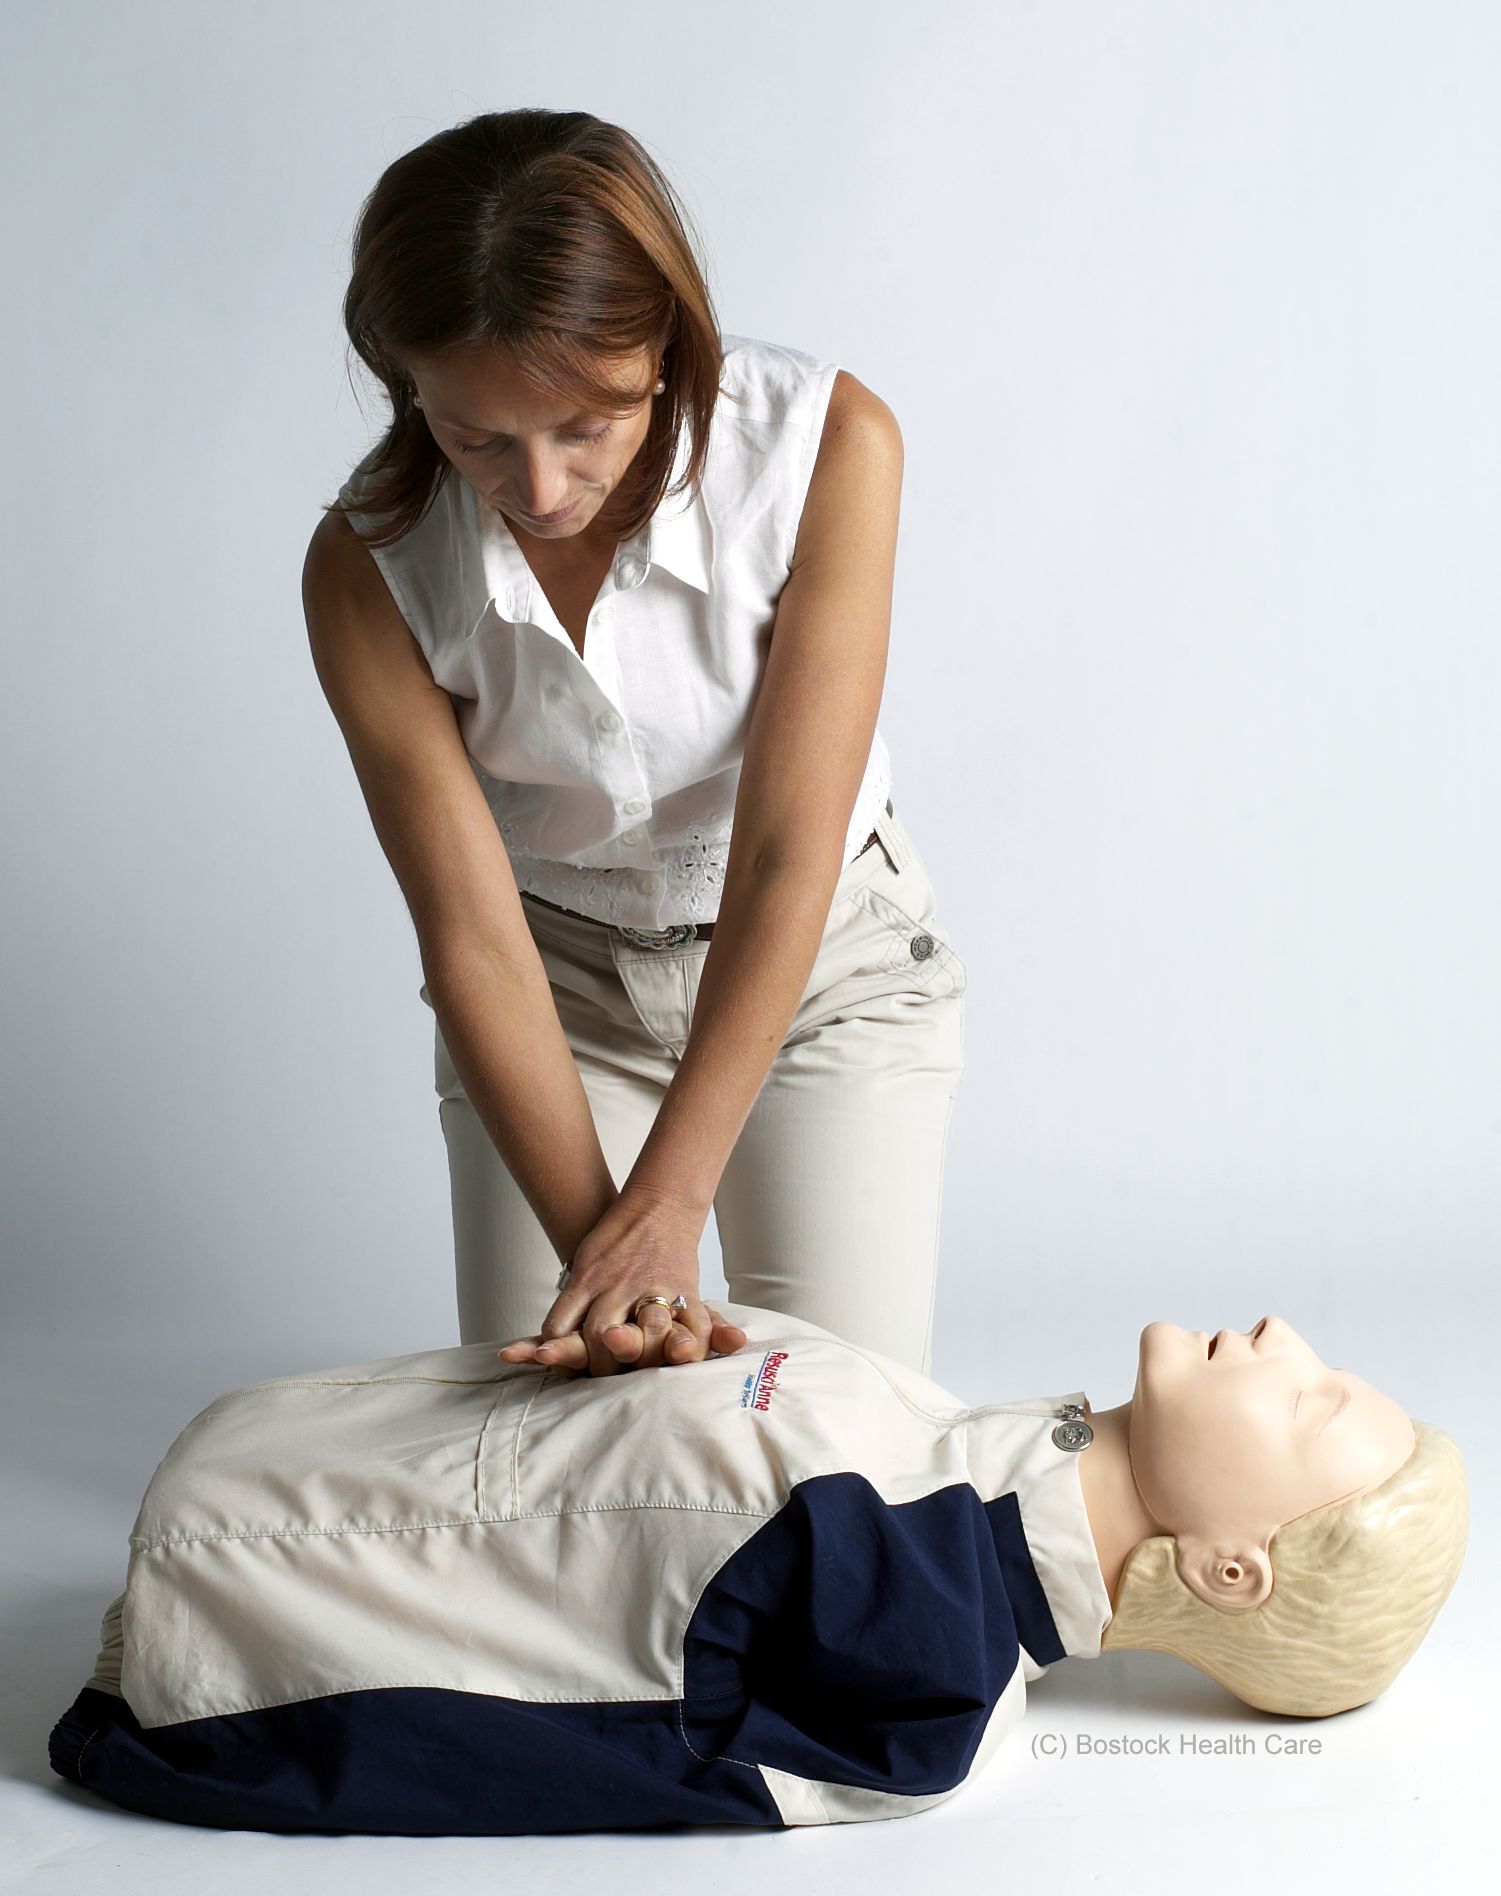 What First Aid Arrangements Do You Need to Have in Your Workplace?